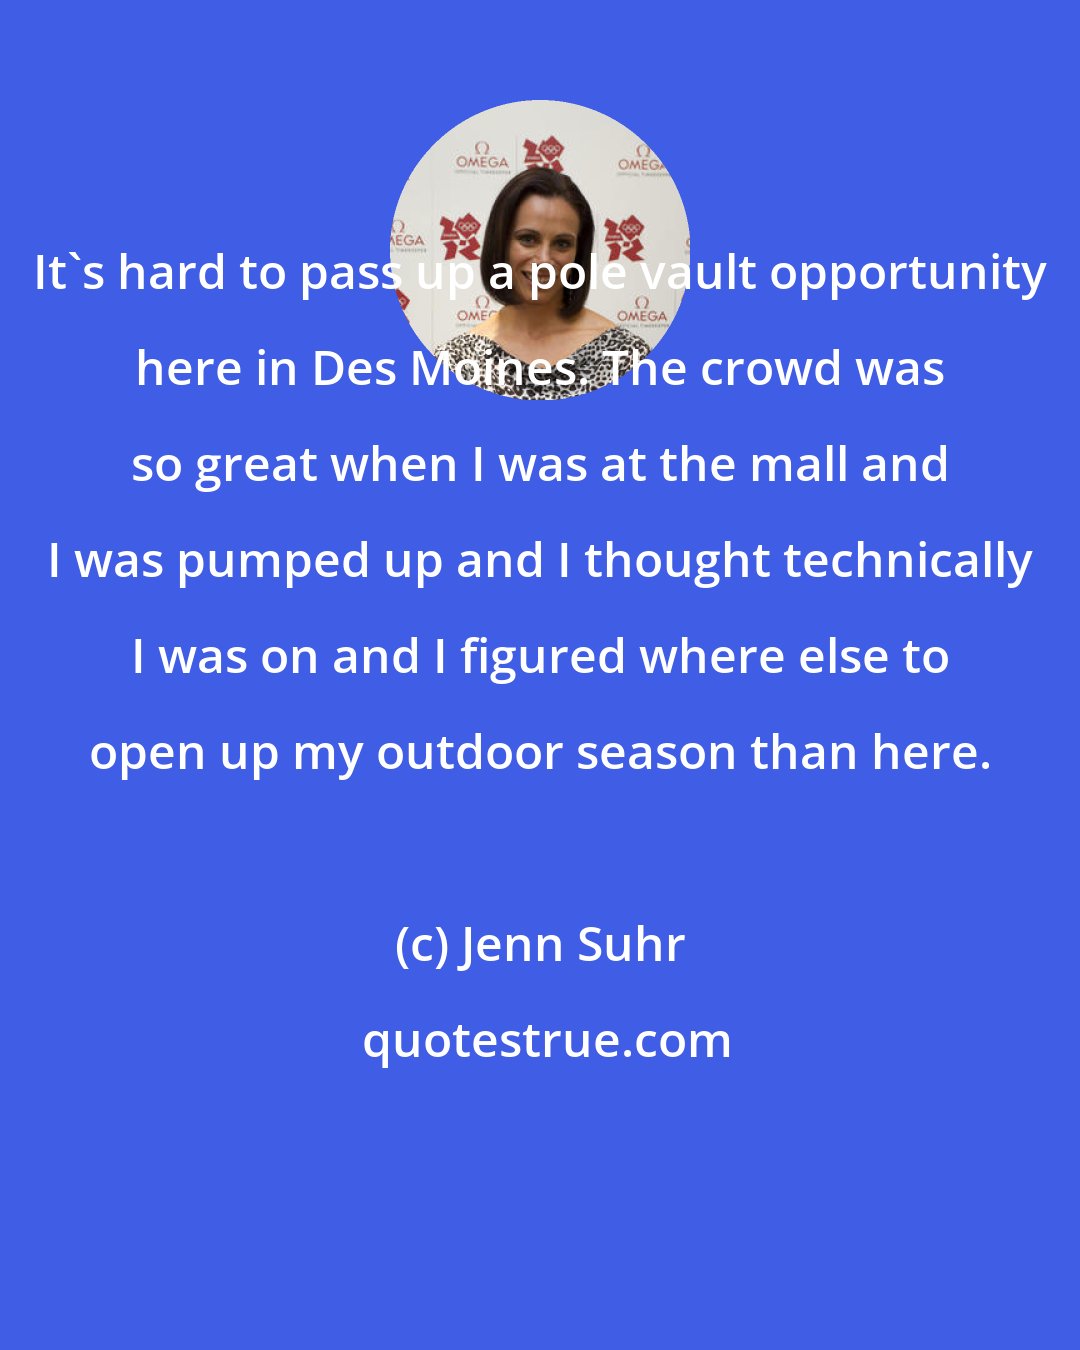 Jenn Suhr: It's hard to pass up a pole vault opportunity here in Des Moines. The crowd was so great when I was at the mall and I was pumped up and I thought technically I was on and I figured where else to open up my outdoor season than here.